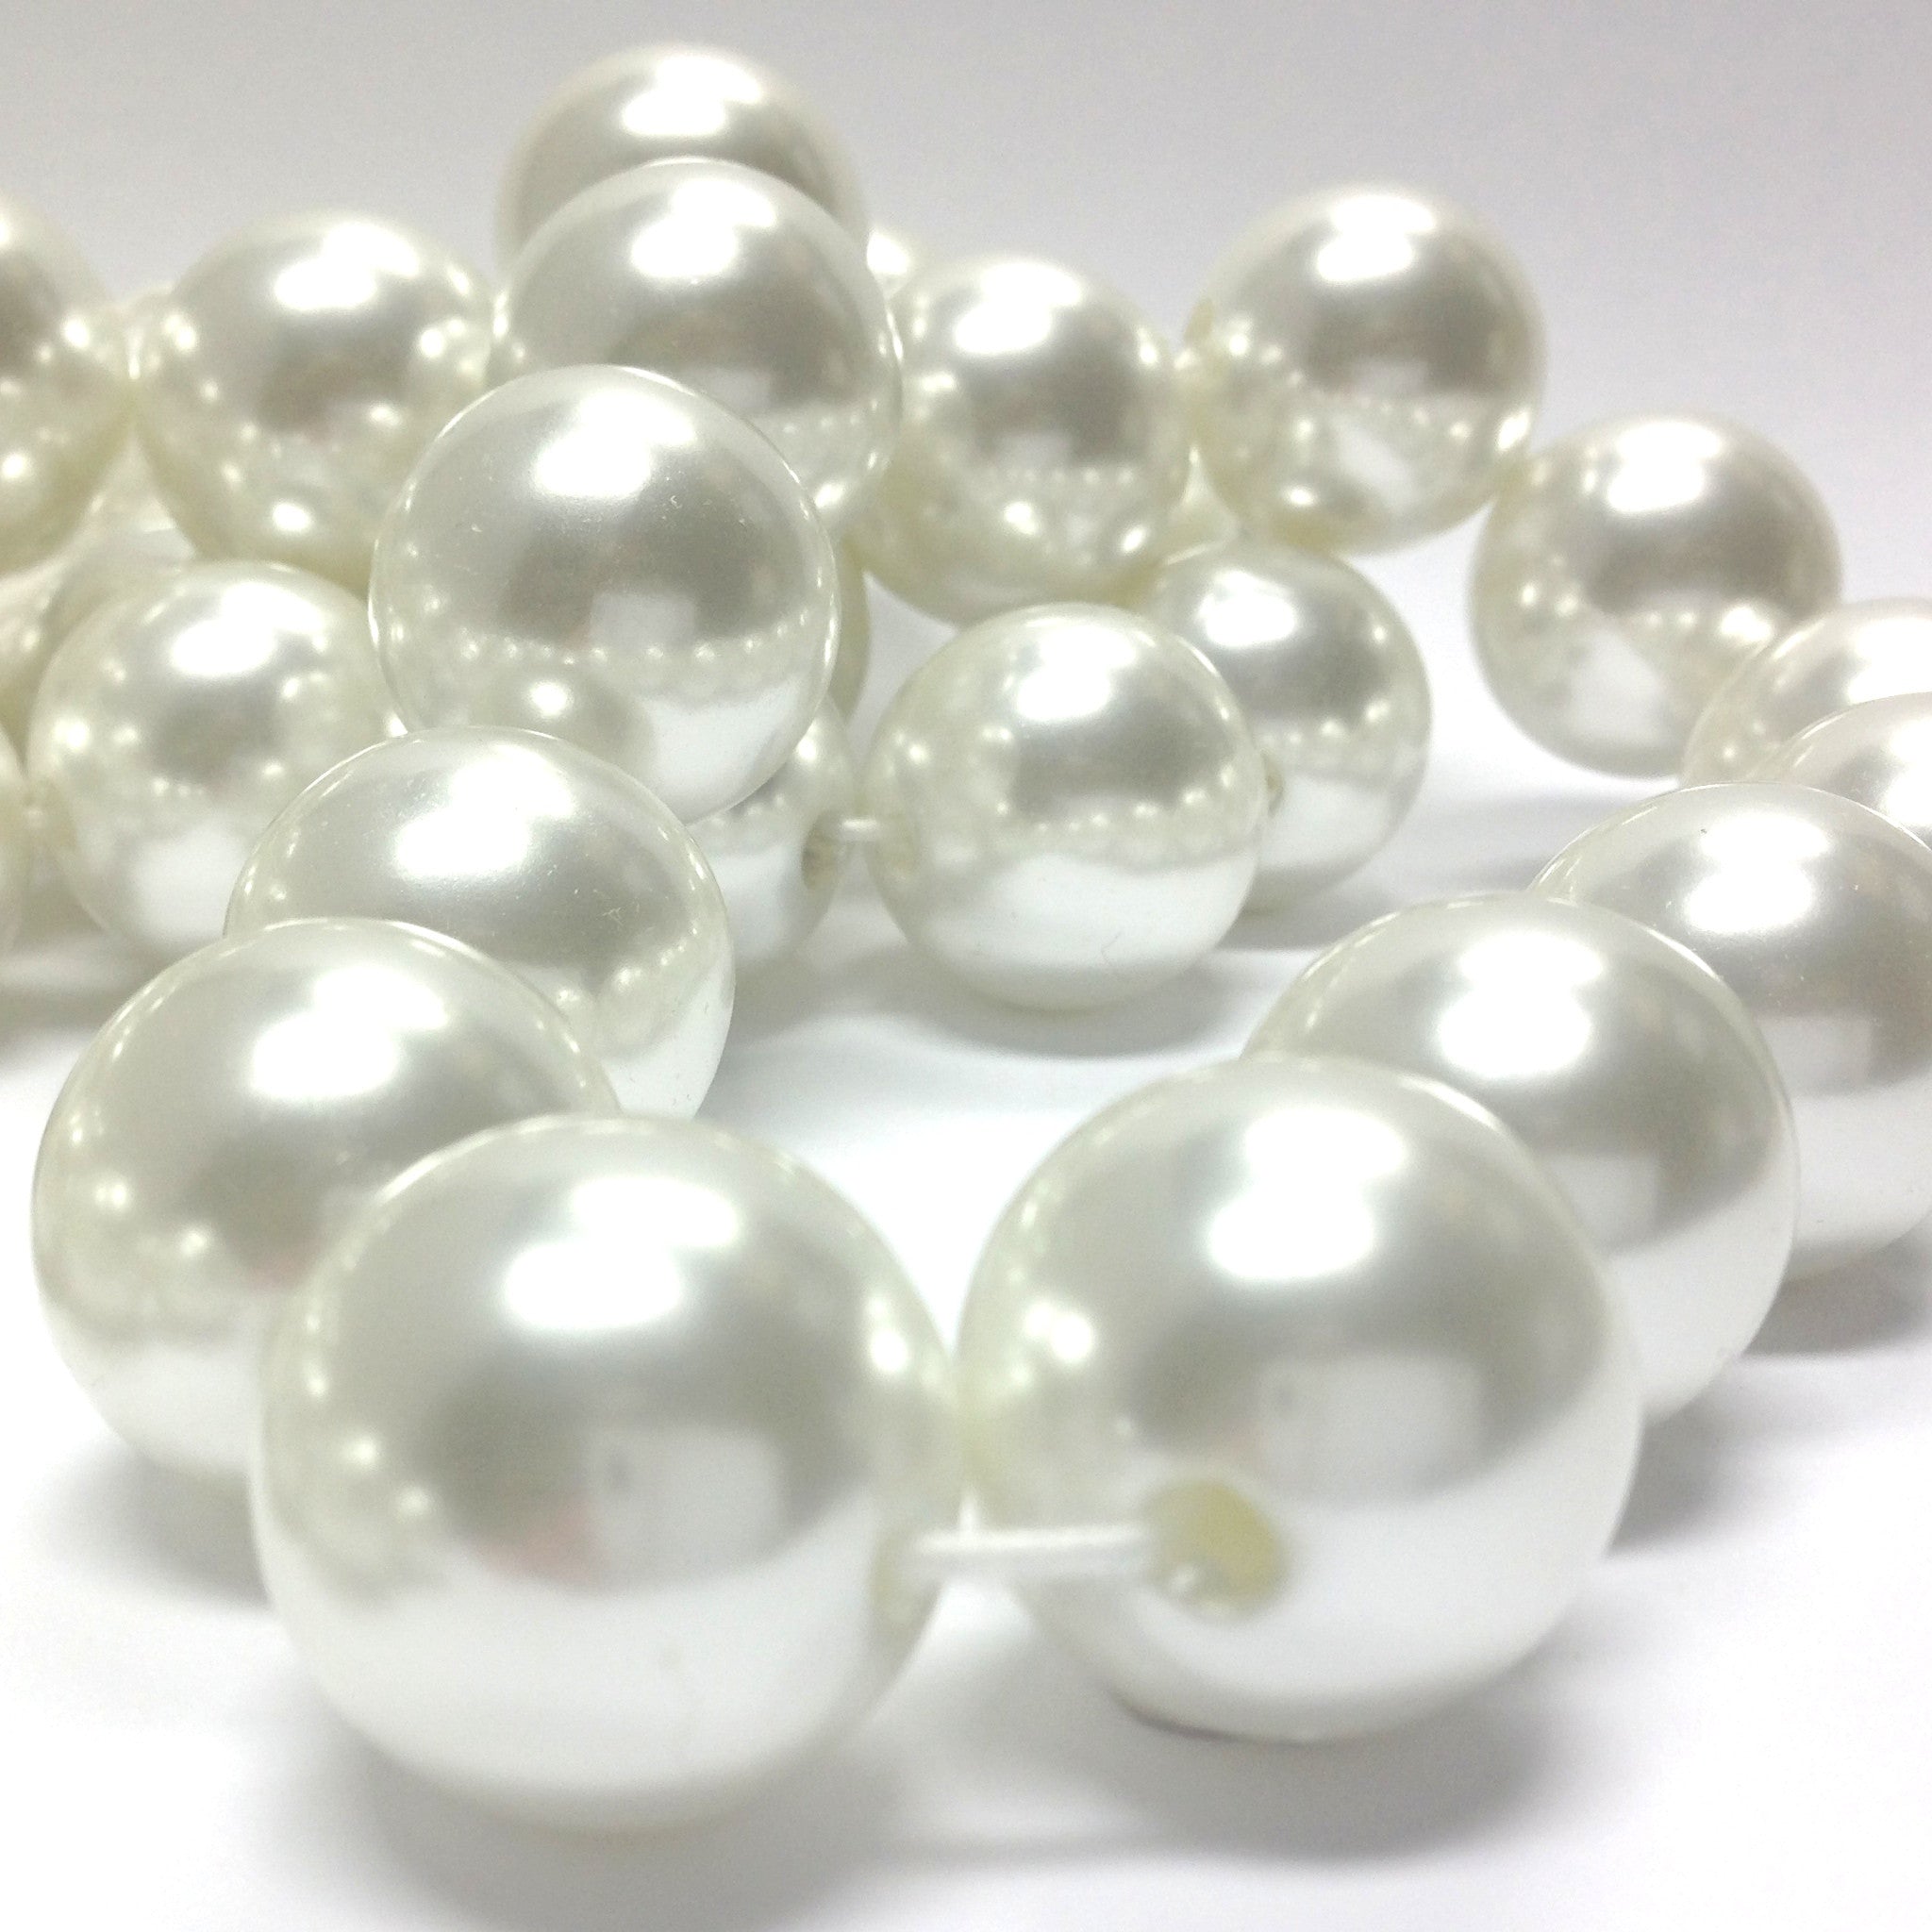 Large White Pearls with Hole - 3 Sizes of Beads 